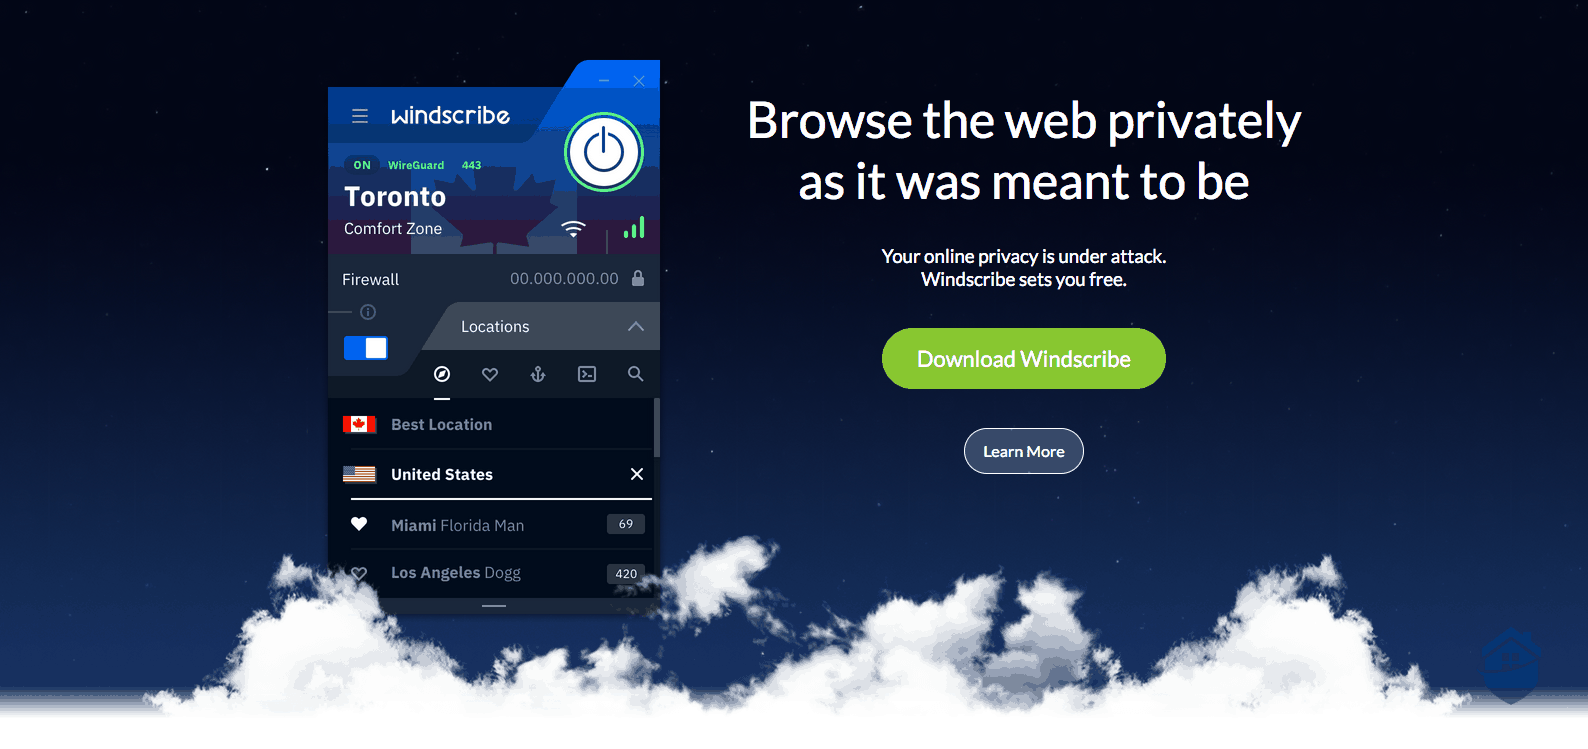 Windscribe Download Page